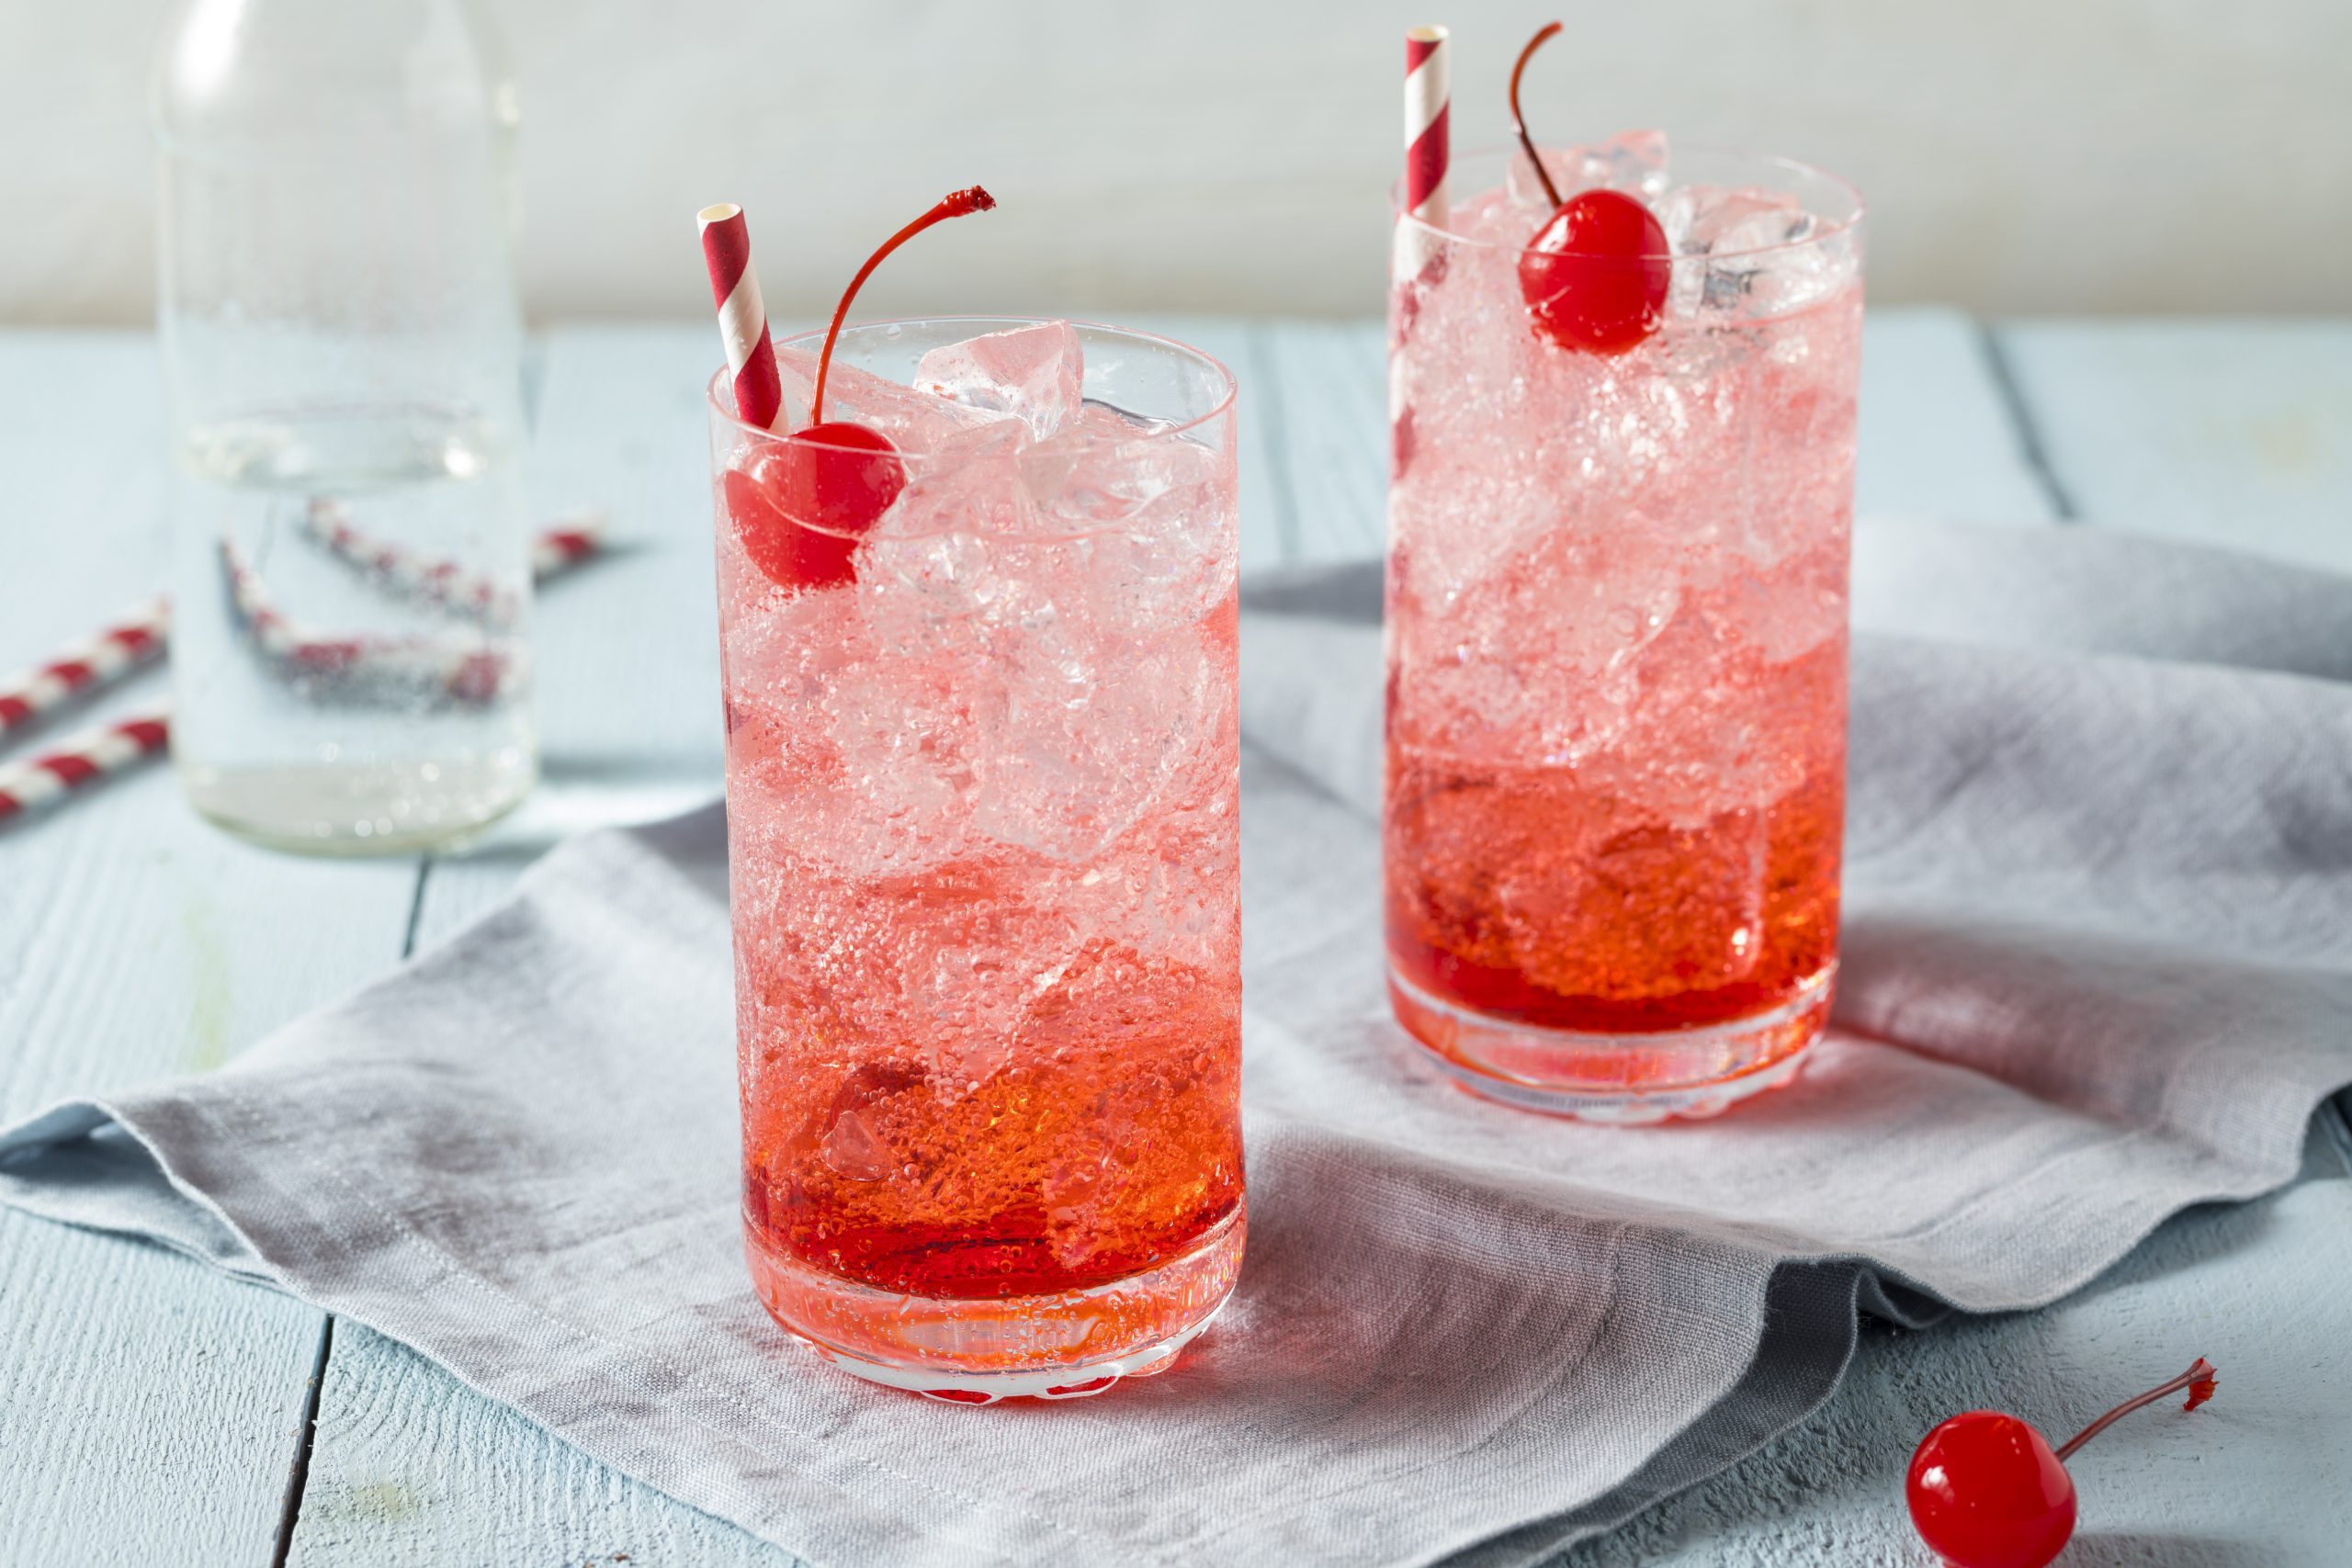 shirley temple cocktail recipe and history